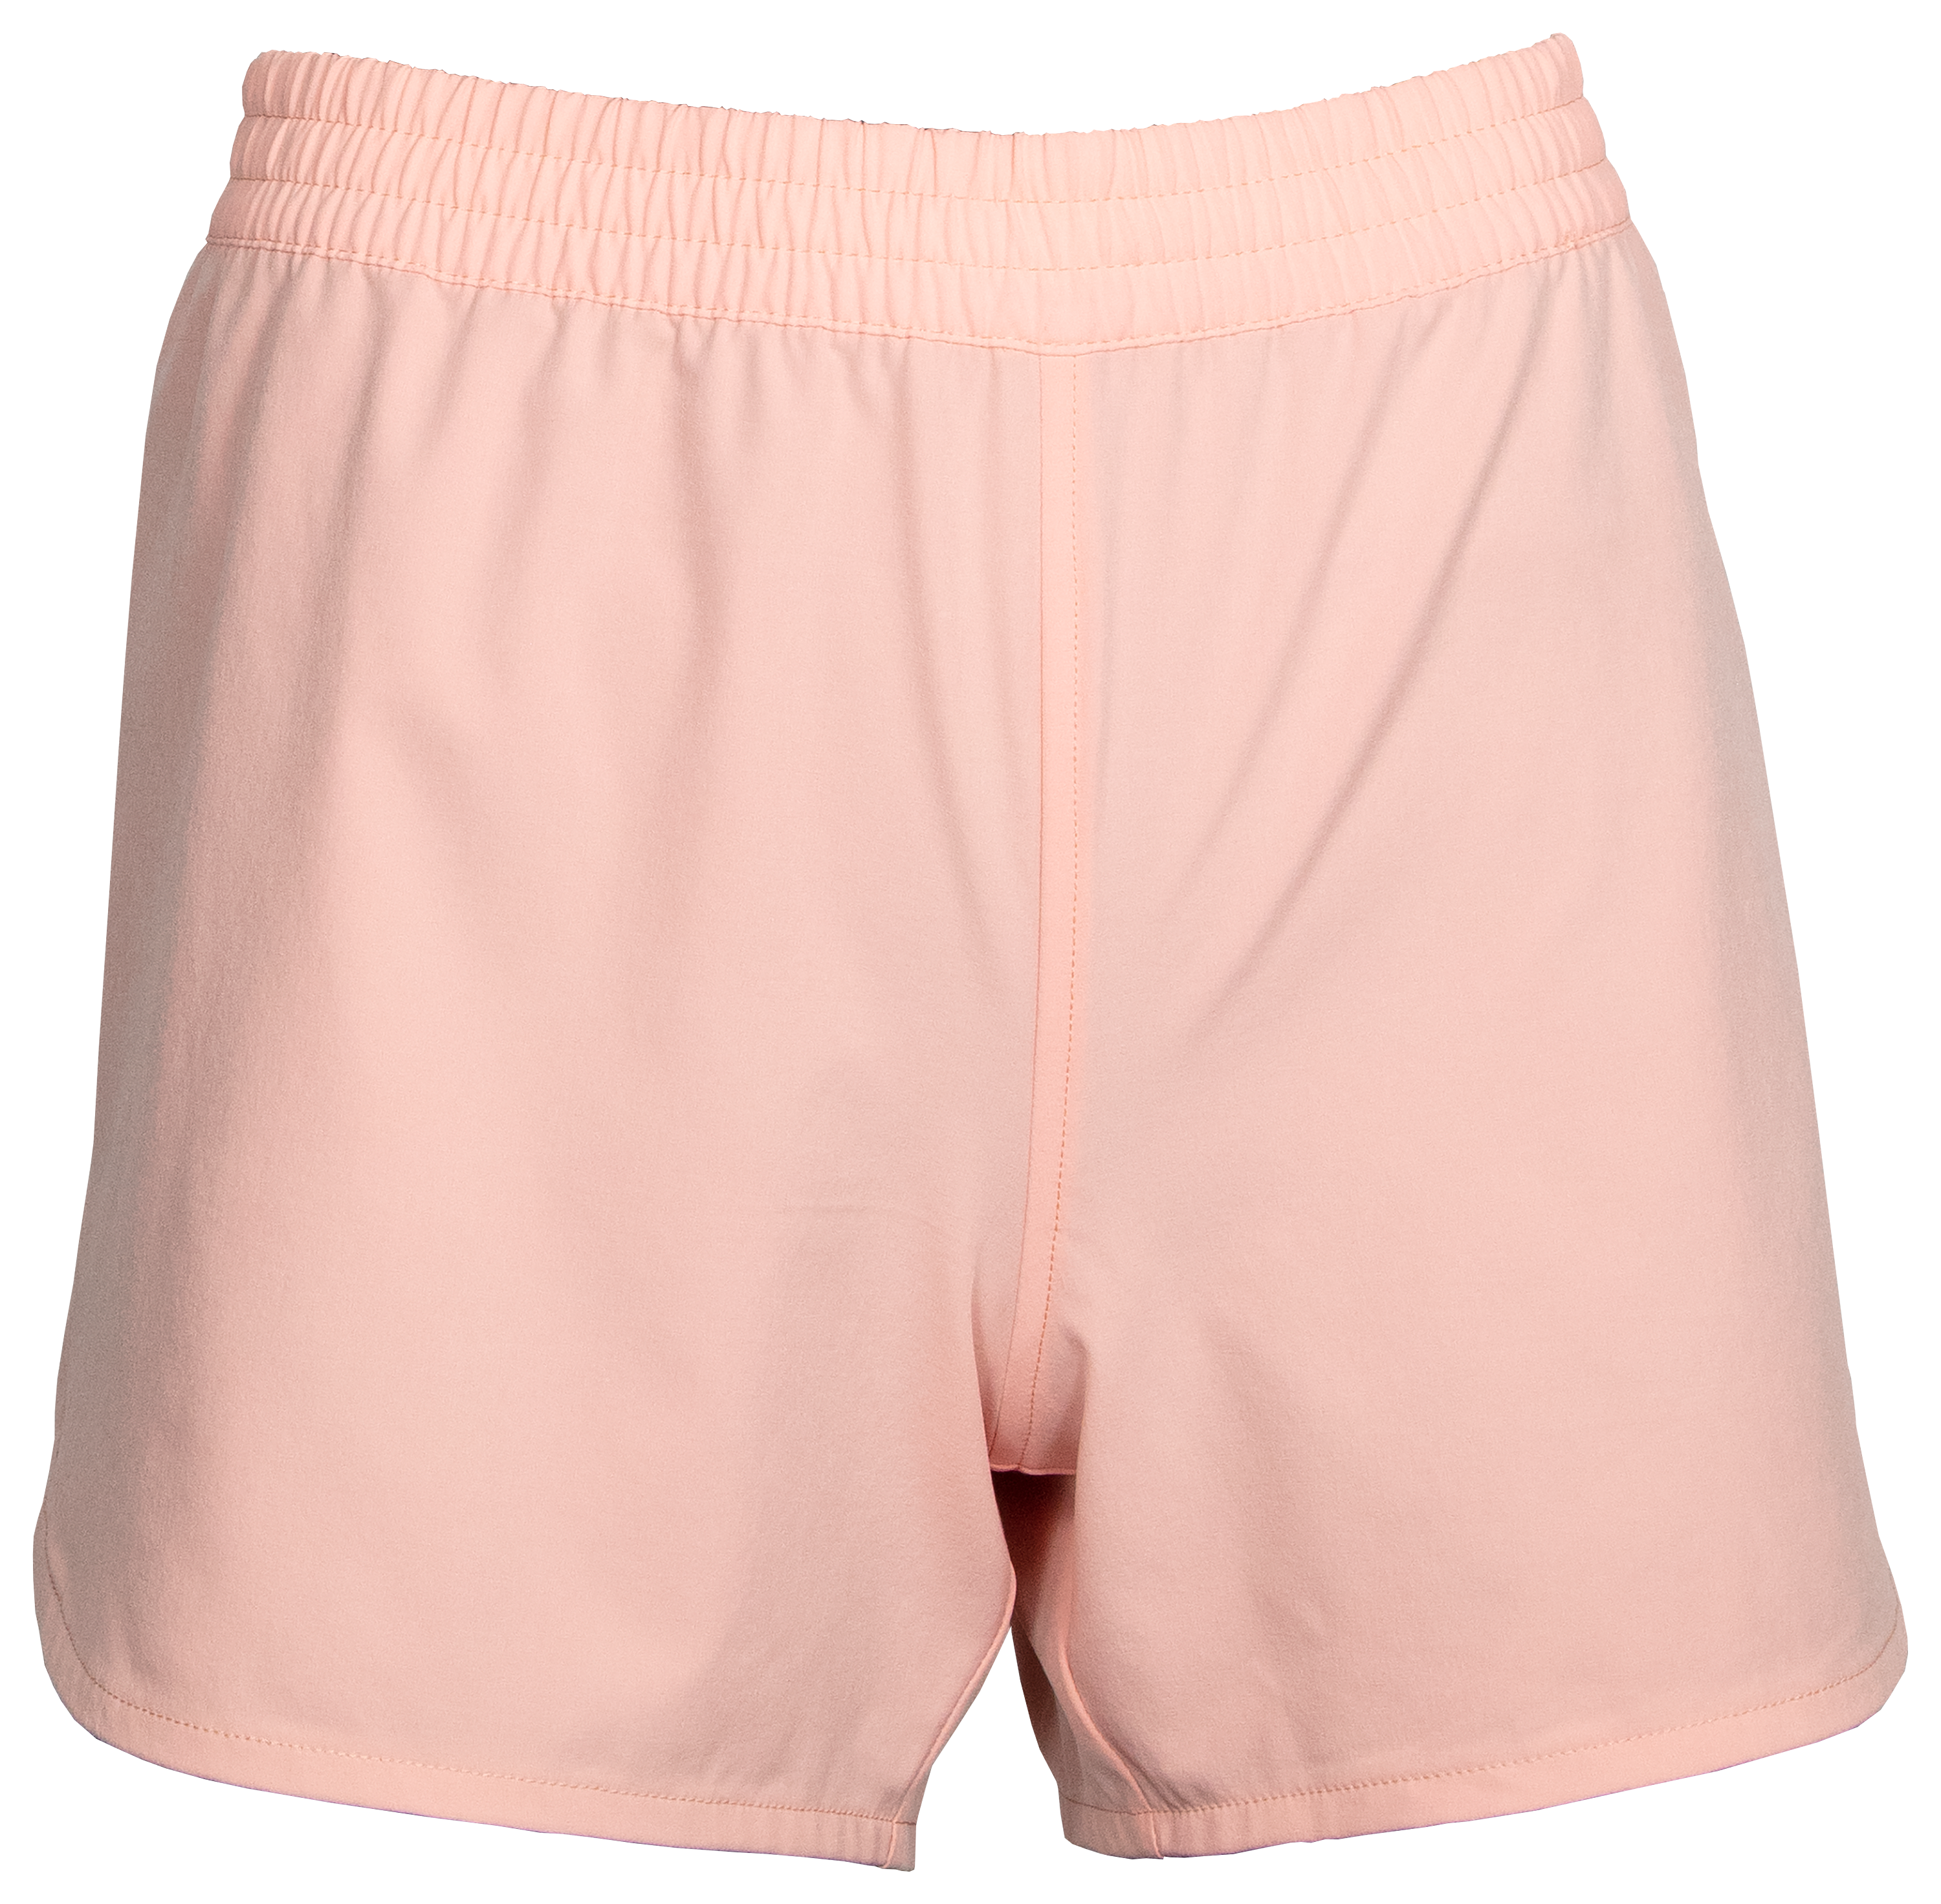 World Wide Sportsman Charter Print Pull-On Shorts for Ladies - Candlelight Peach - M